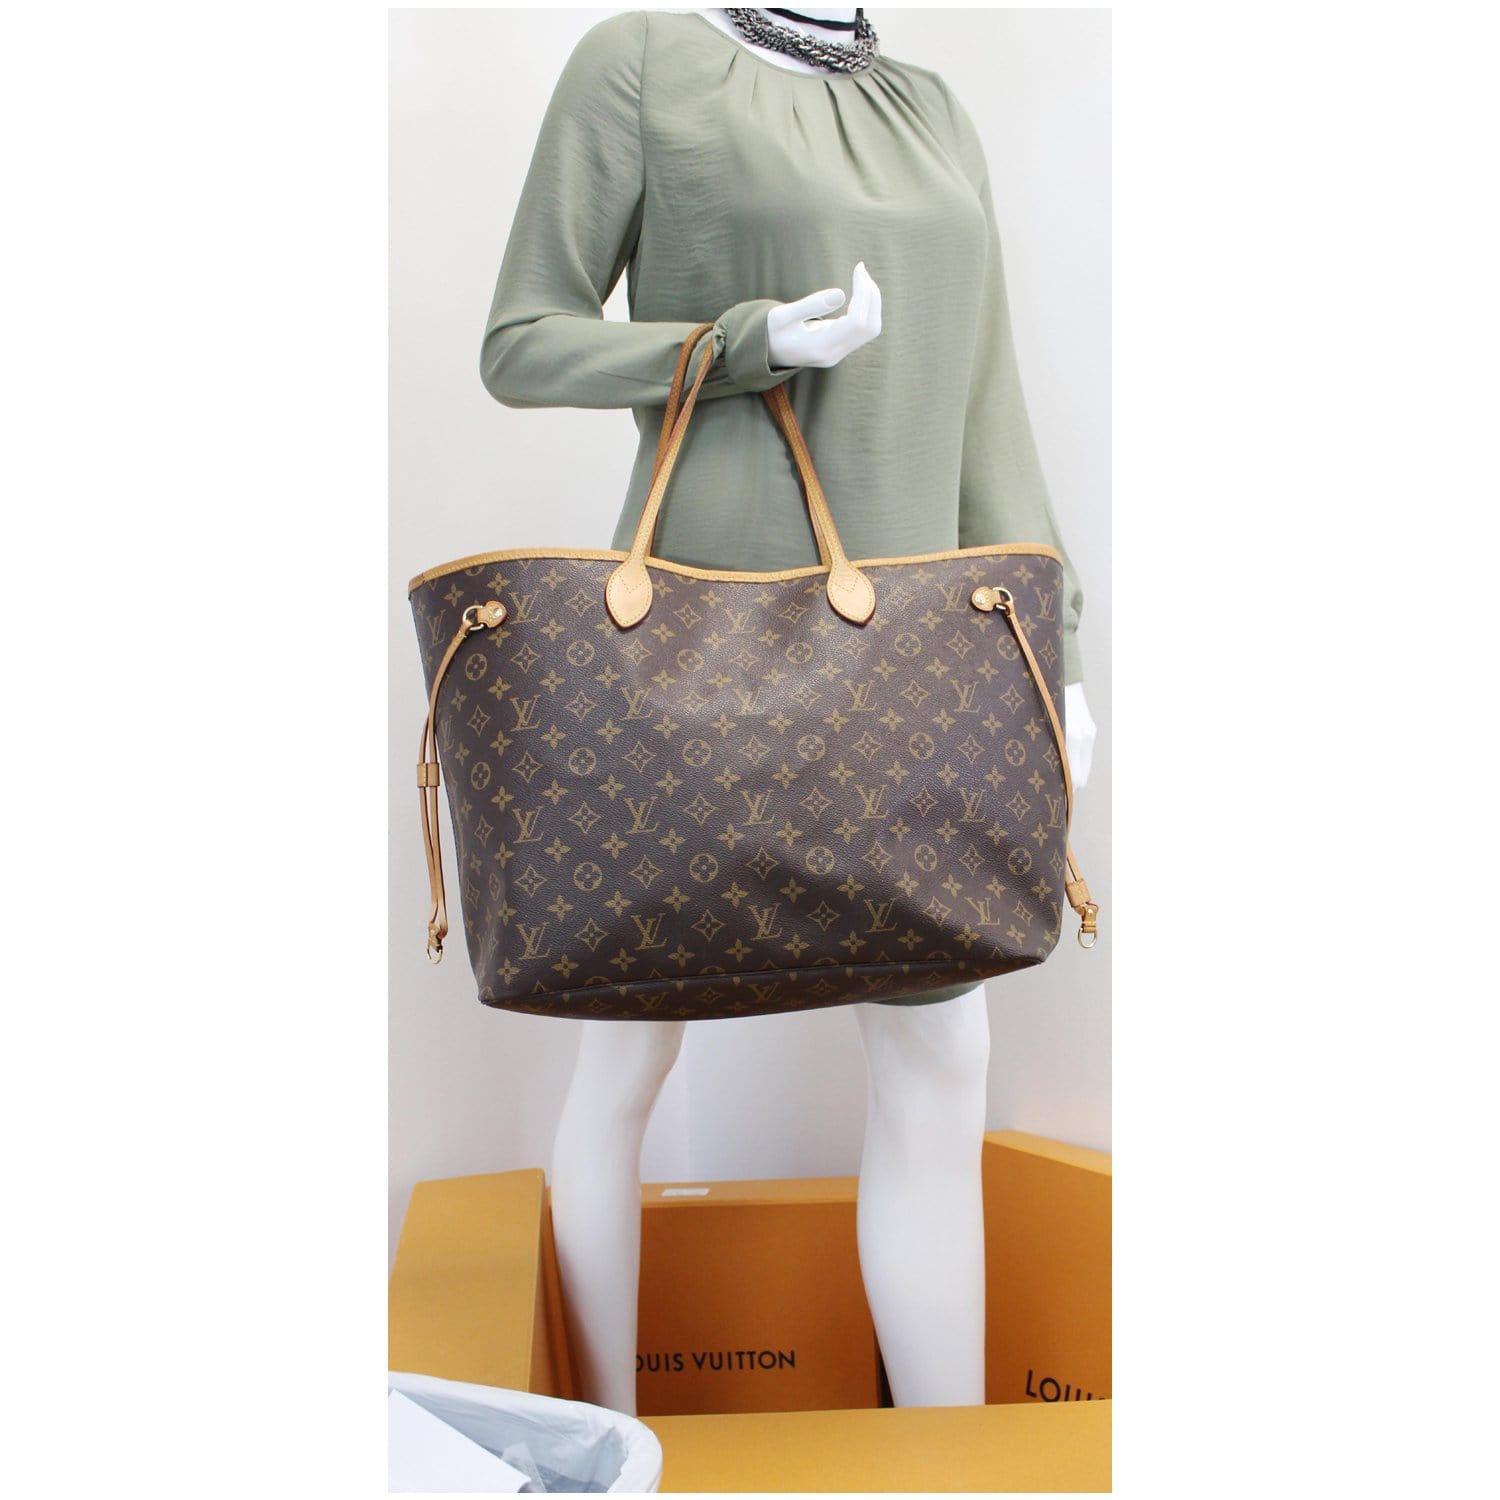 Louis Vuitton, Bags, Lv Neverfull Gm Day Sale Price Firm